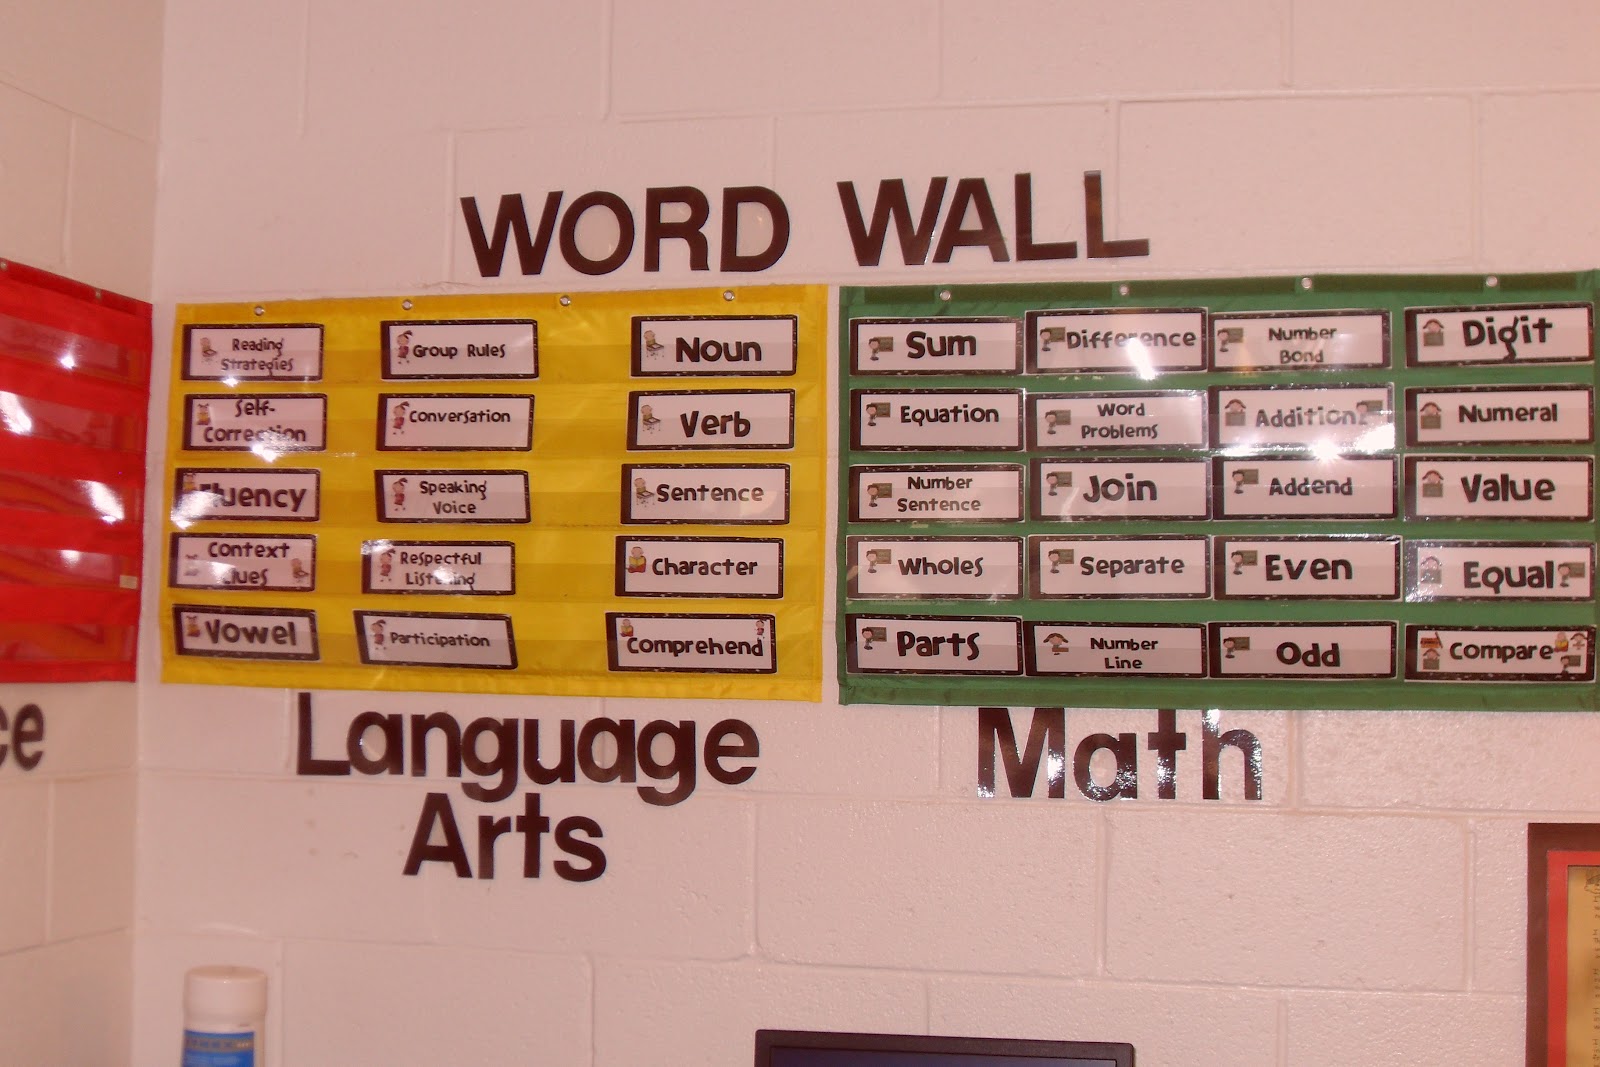 Wordwall problems. Word Wall. Classrooms Wordwall. Wordwall платформа. Time Wordwall.